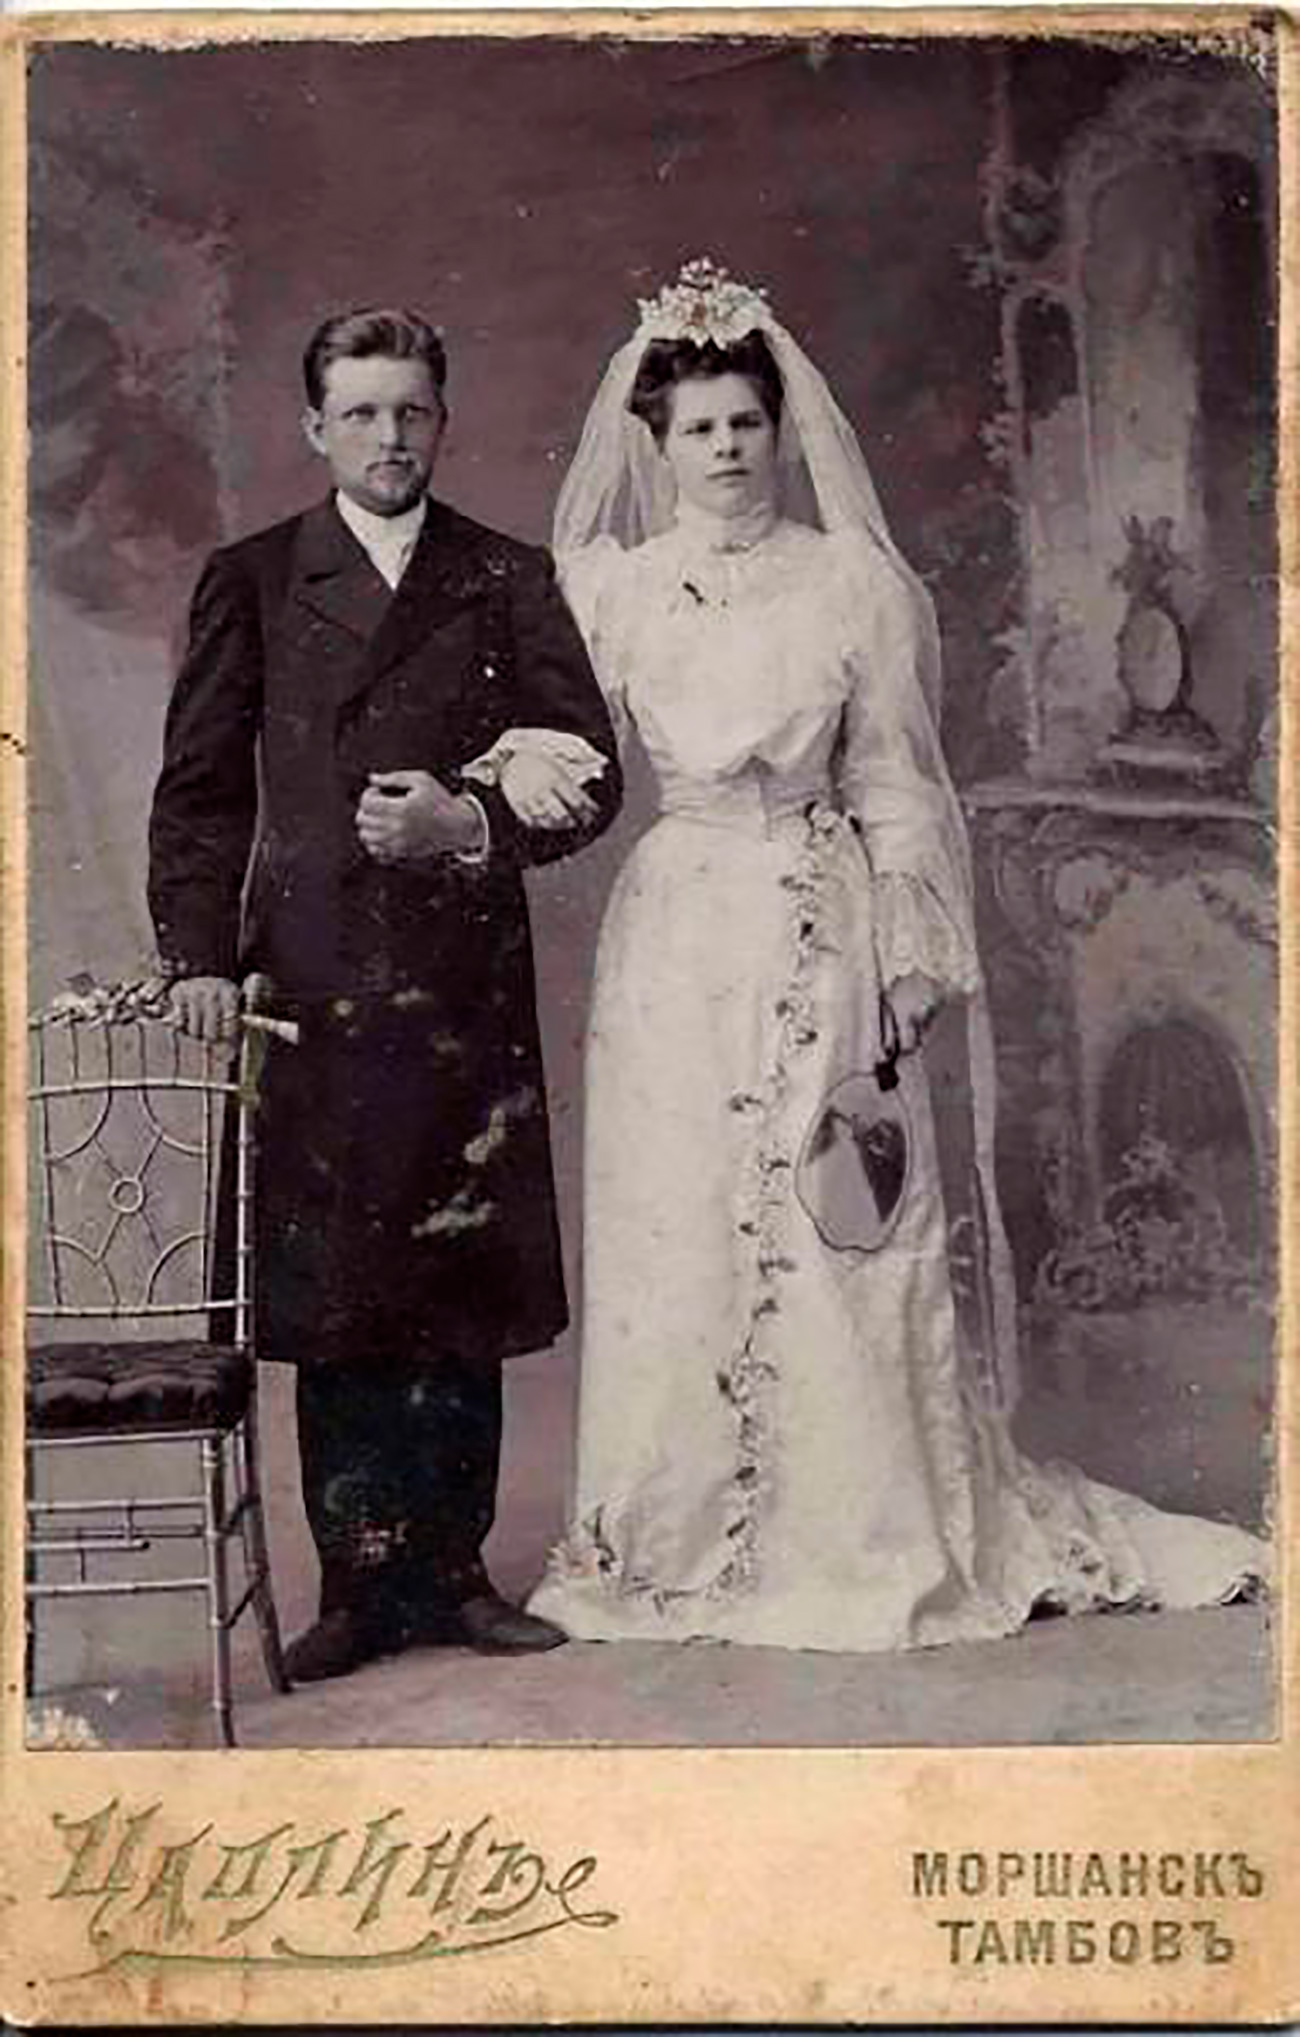 More often than not, the groom was older than his bride. The ideal marriage age was generally thought to be 18-22 for women and 25-30 for men. (Tambov City, 1907)